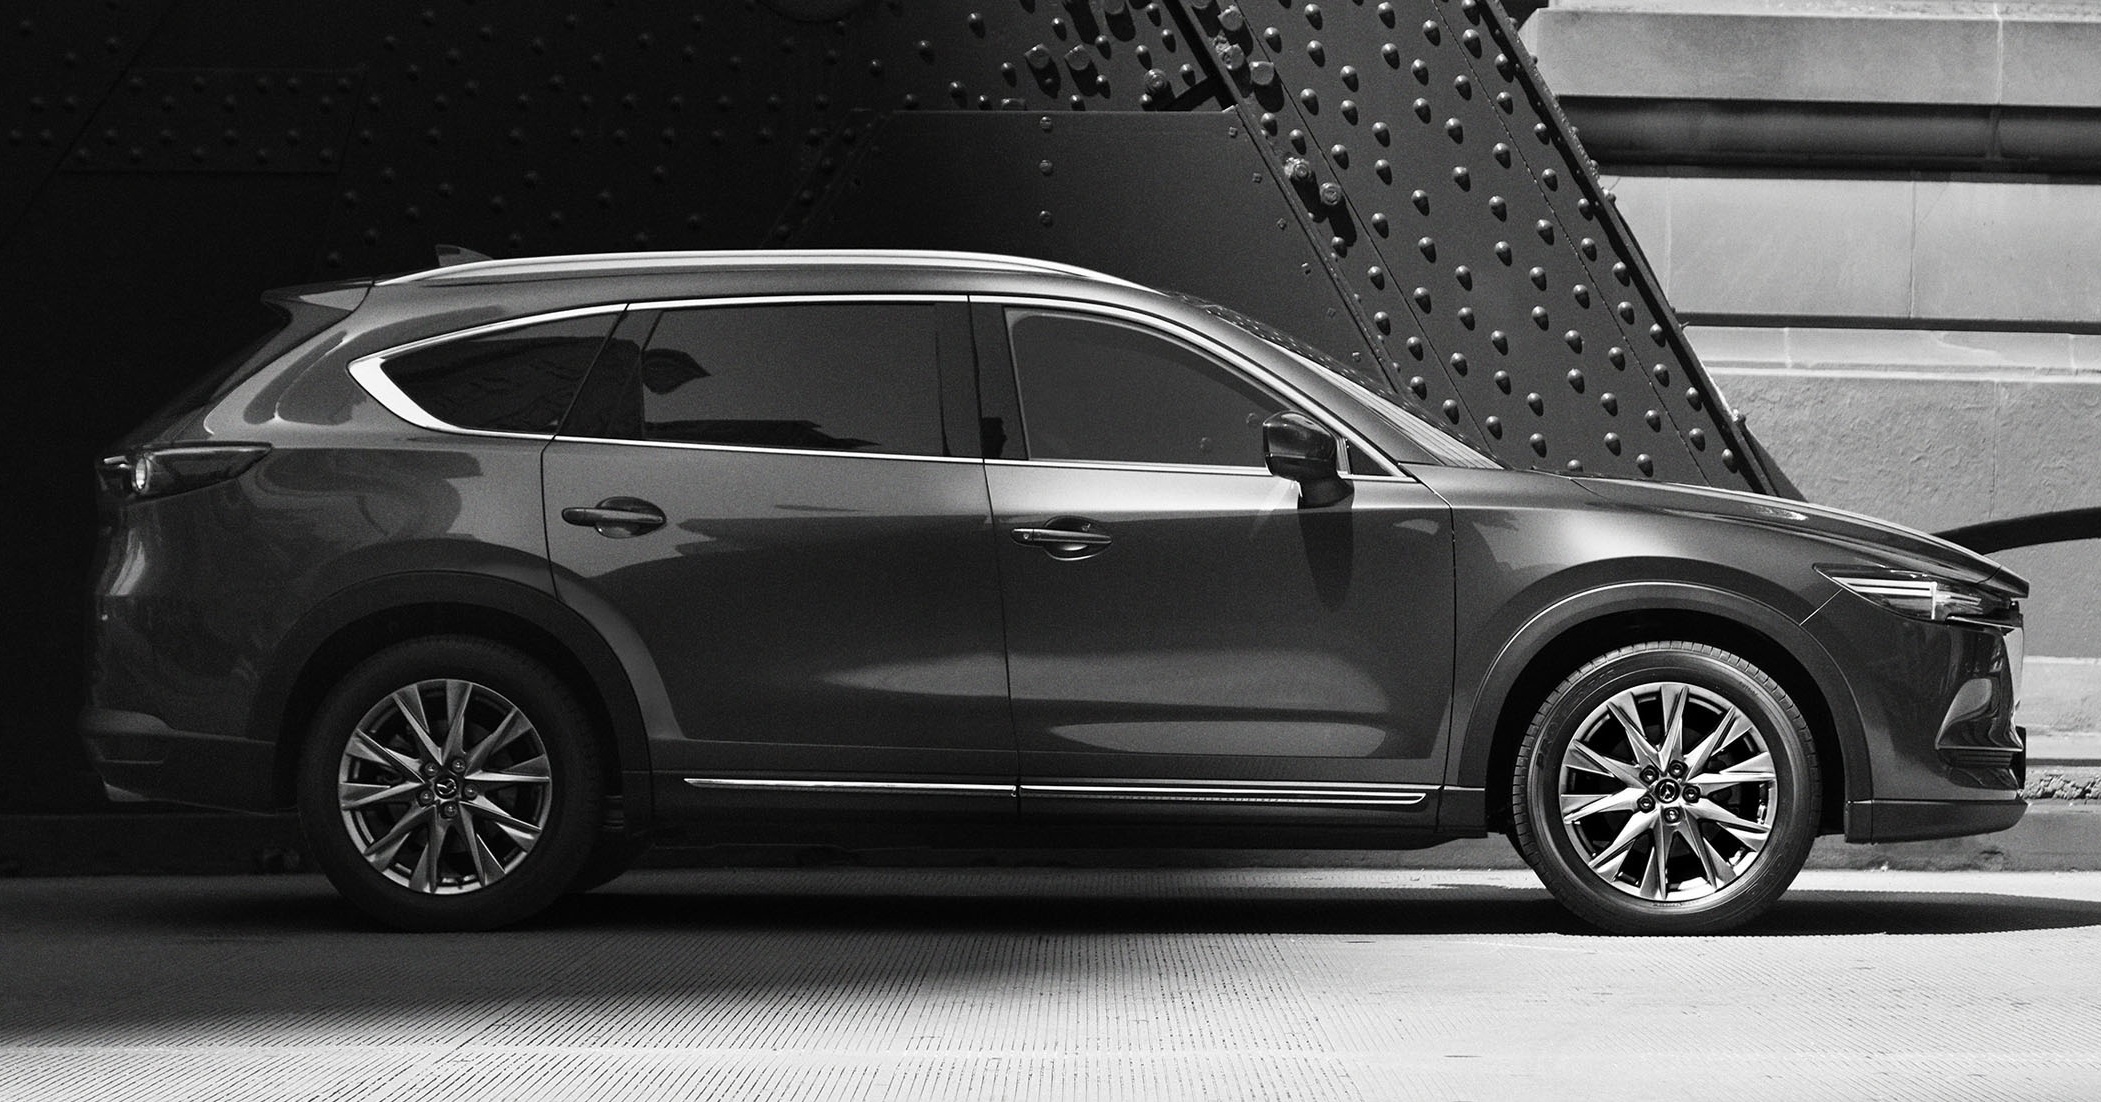 Mazda CX-8 SUV – first official exterior photo revealed P1J14379l